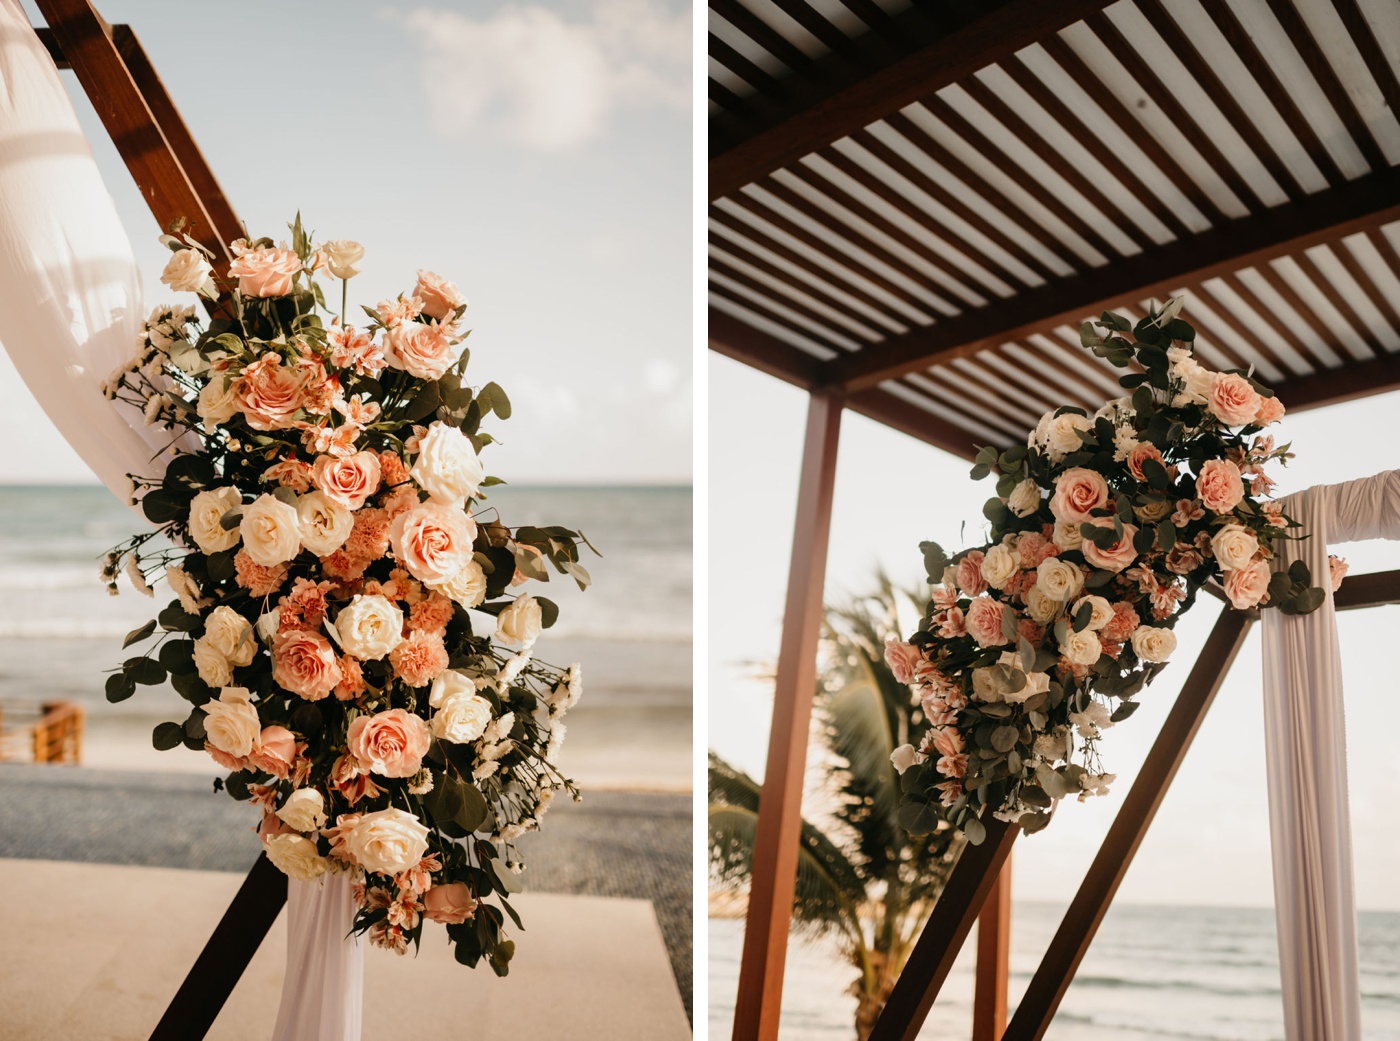 Wedding flower arch with pink and white roses